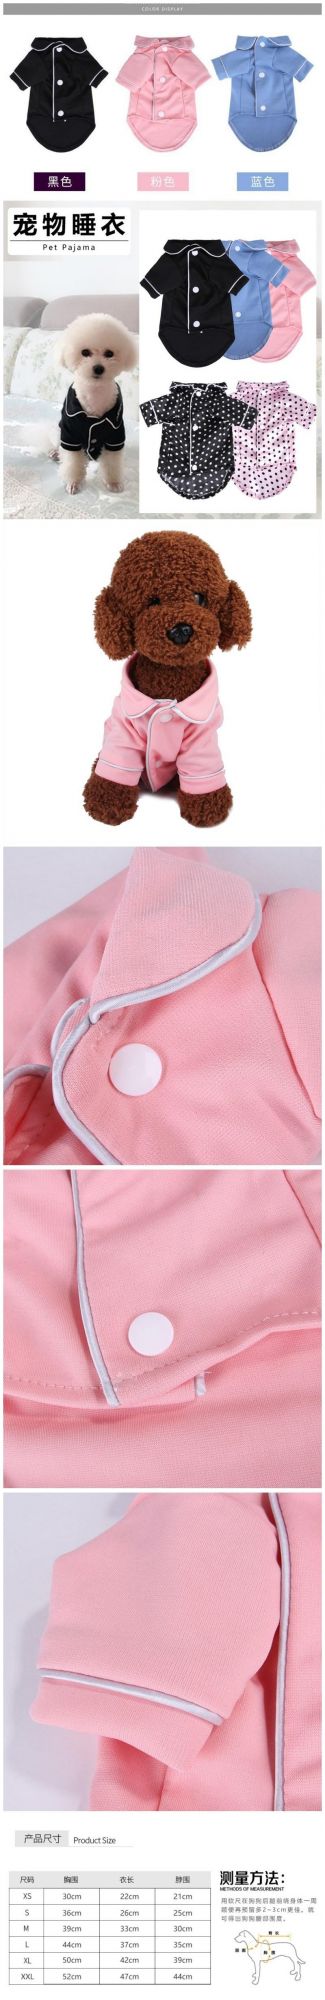 Customized Comfortable Sleepwear Nightdrees Fastener Dog Accessories Apparel Pet Clothes